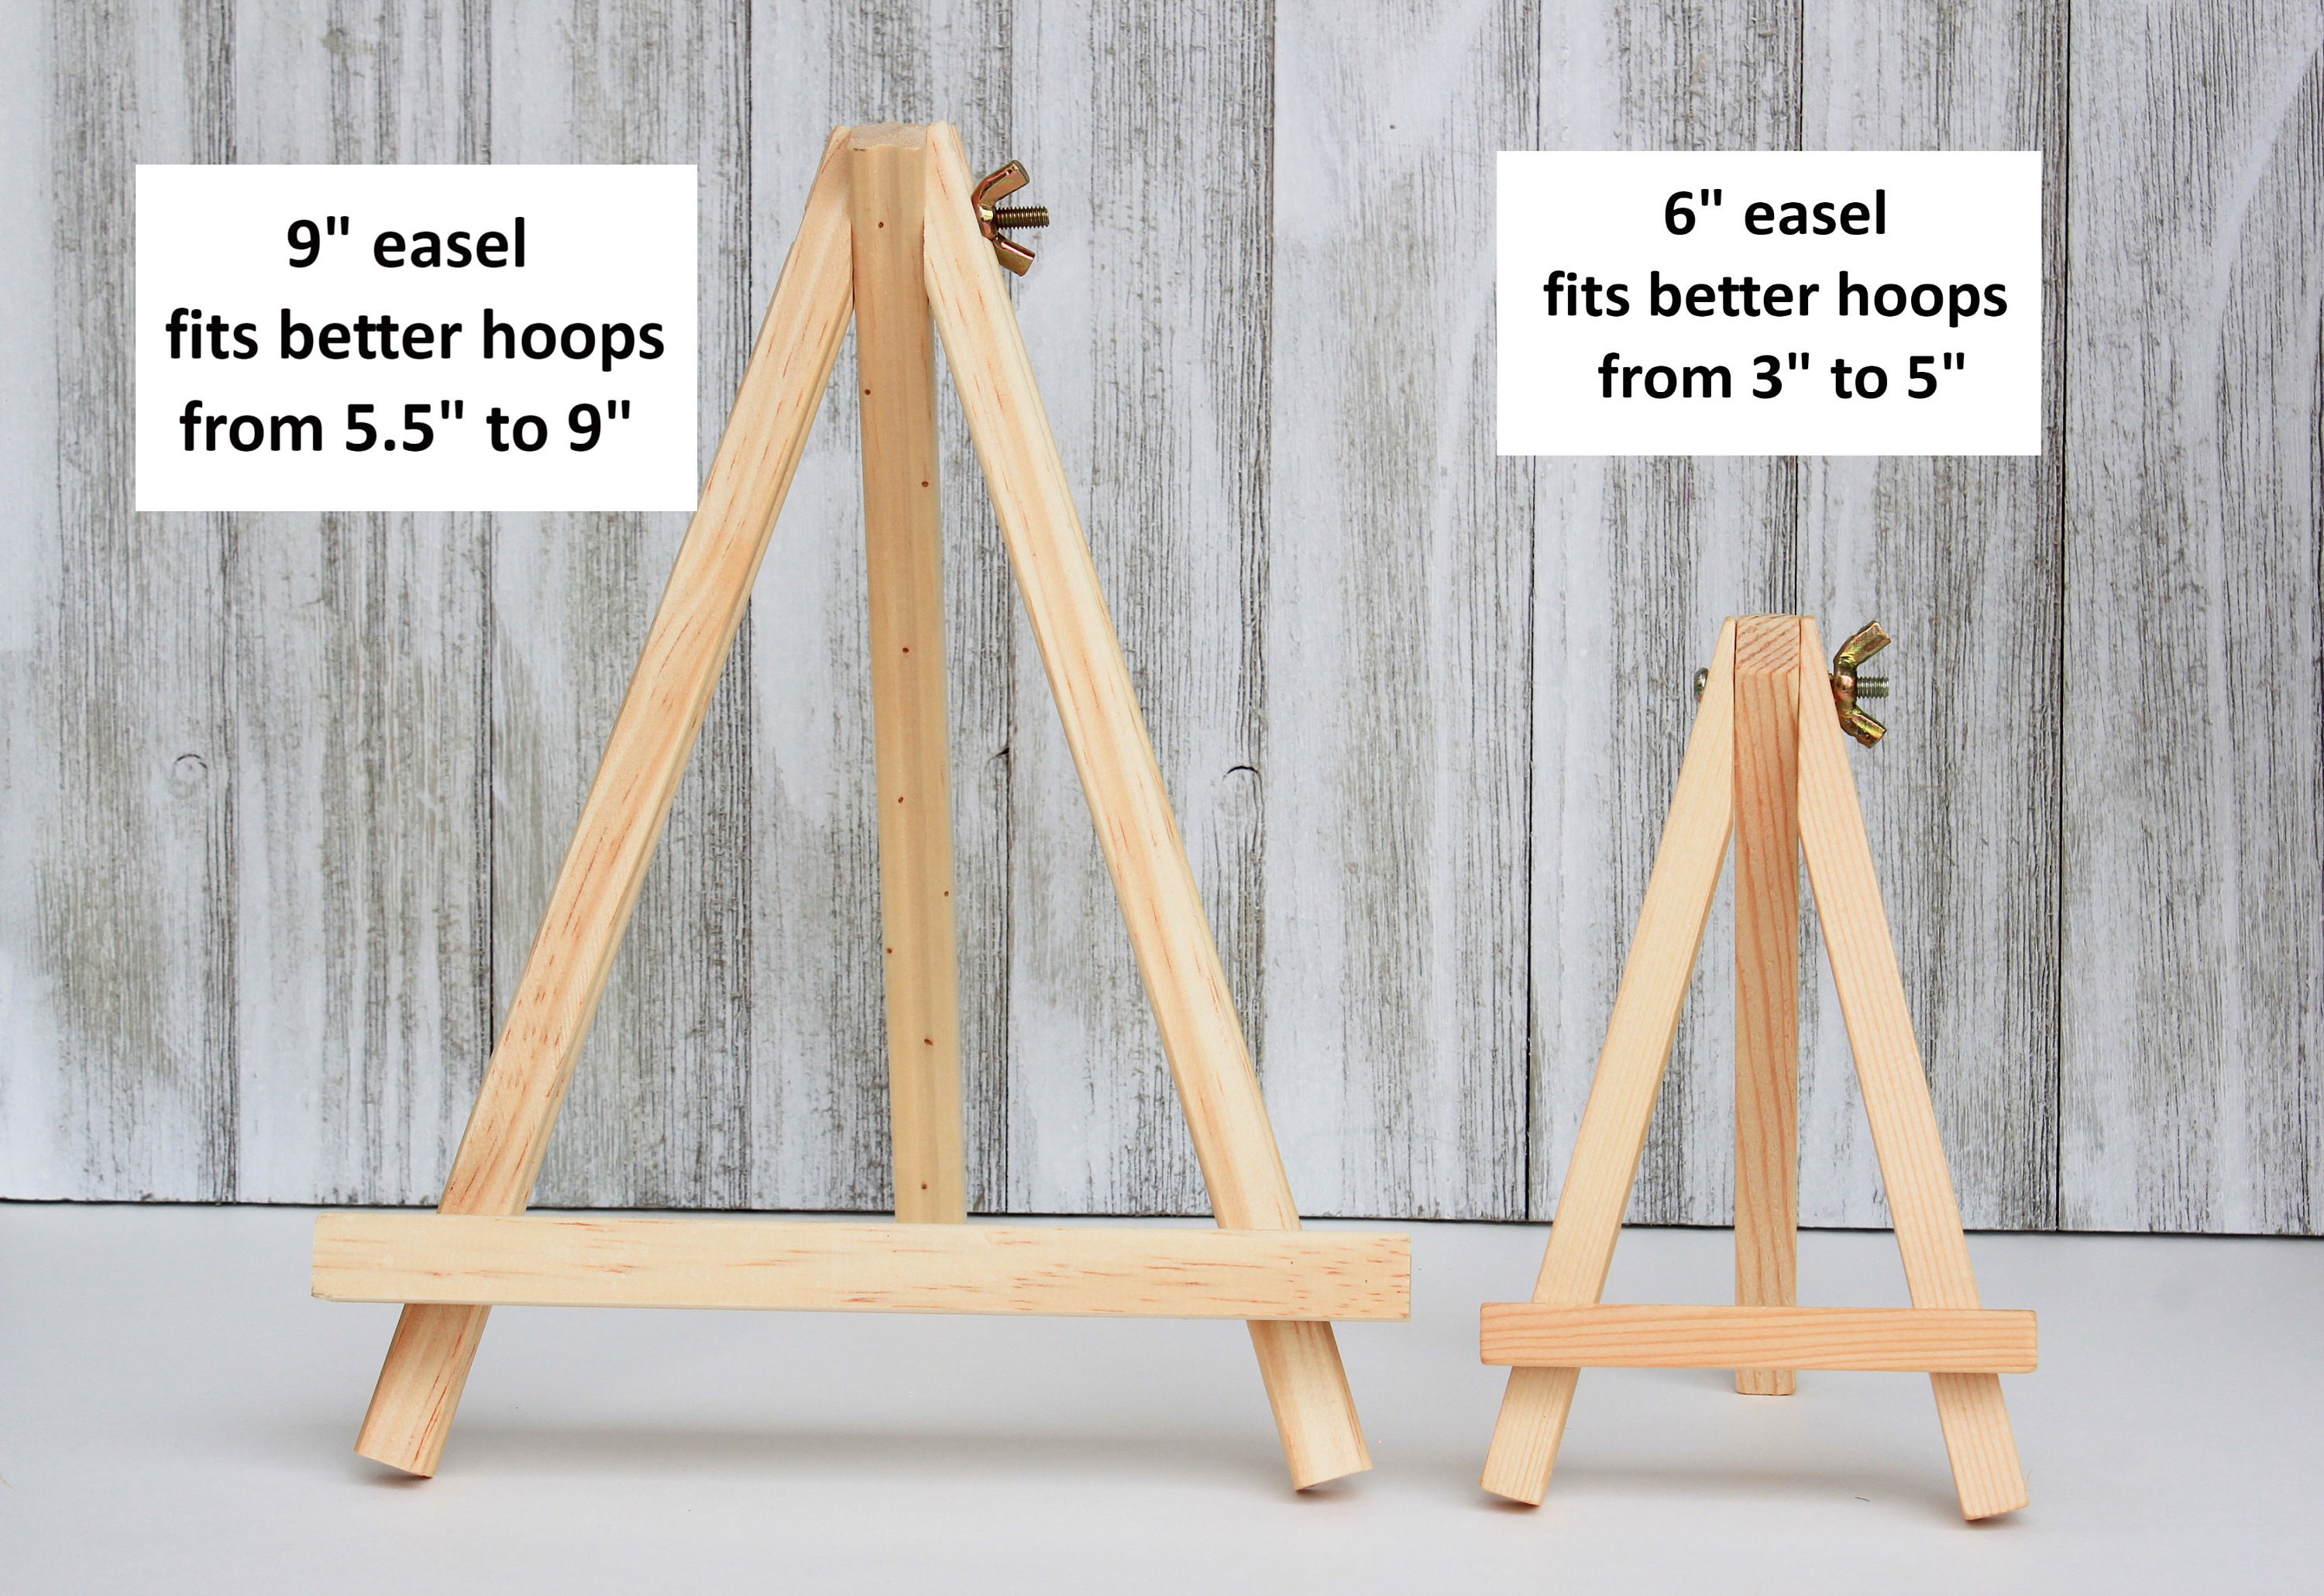 LOOGOOL Mini Easel Stand Wood DIY Embroidery Hoop Wooden Base Holder  Tabletop Display Easel Accessories Embroidery Cross Stitch Standing Decor 5